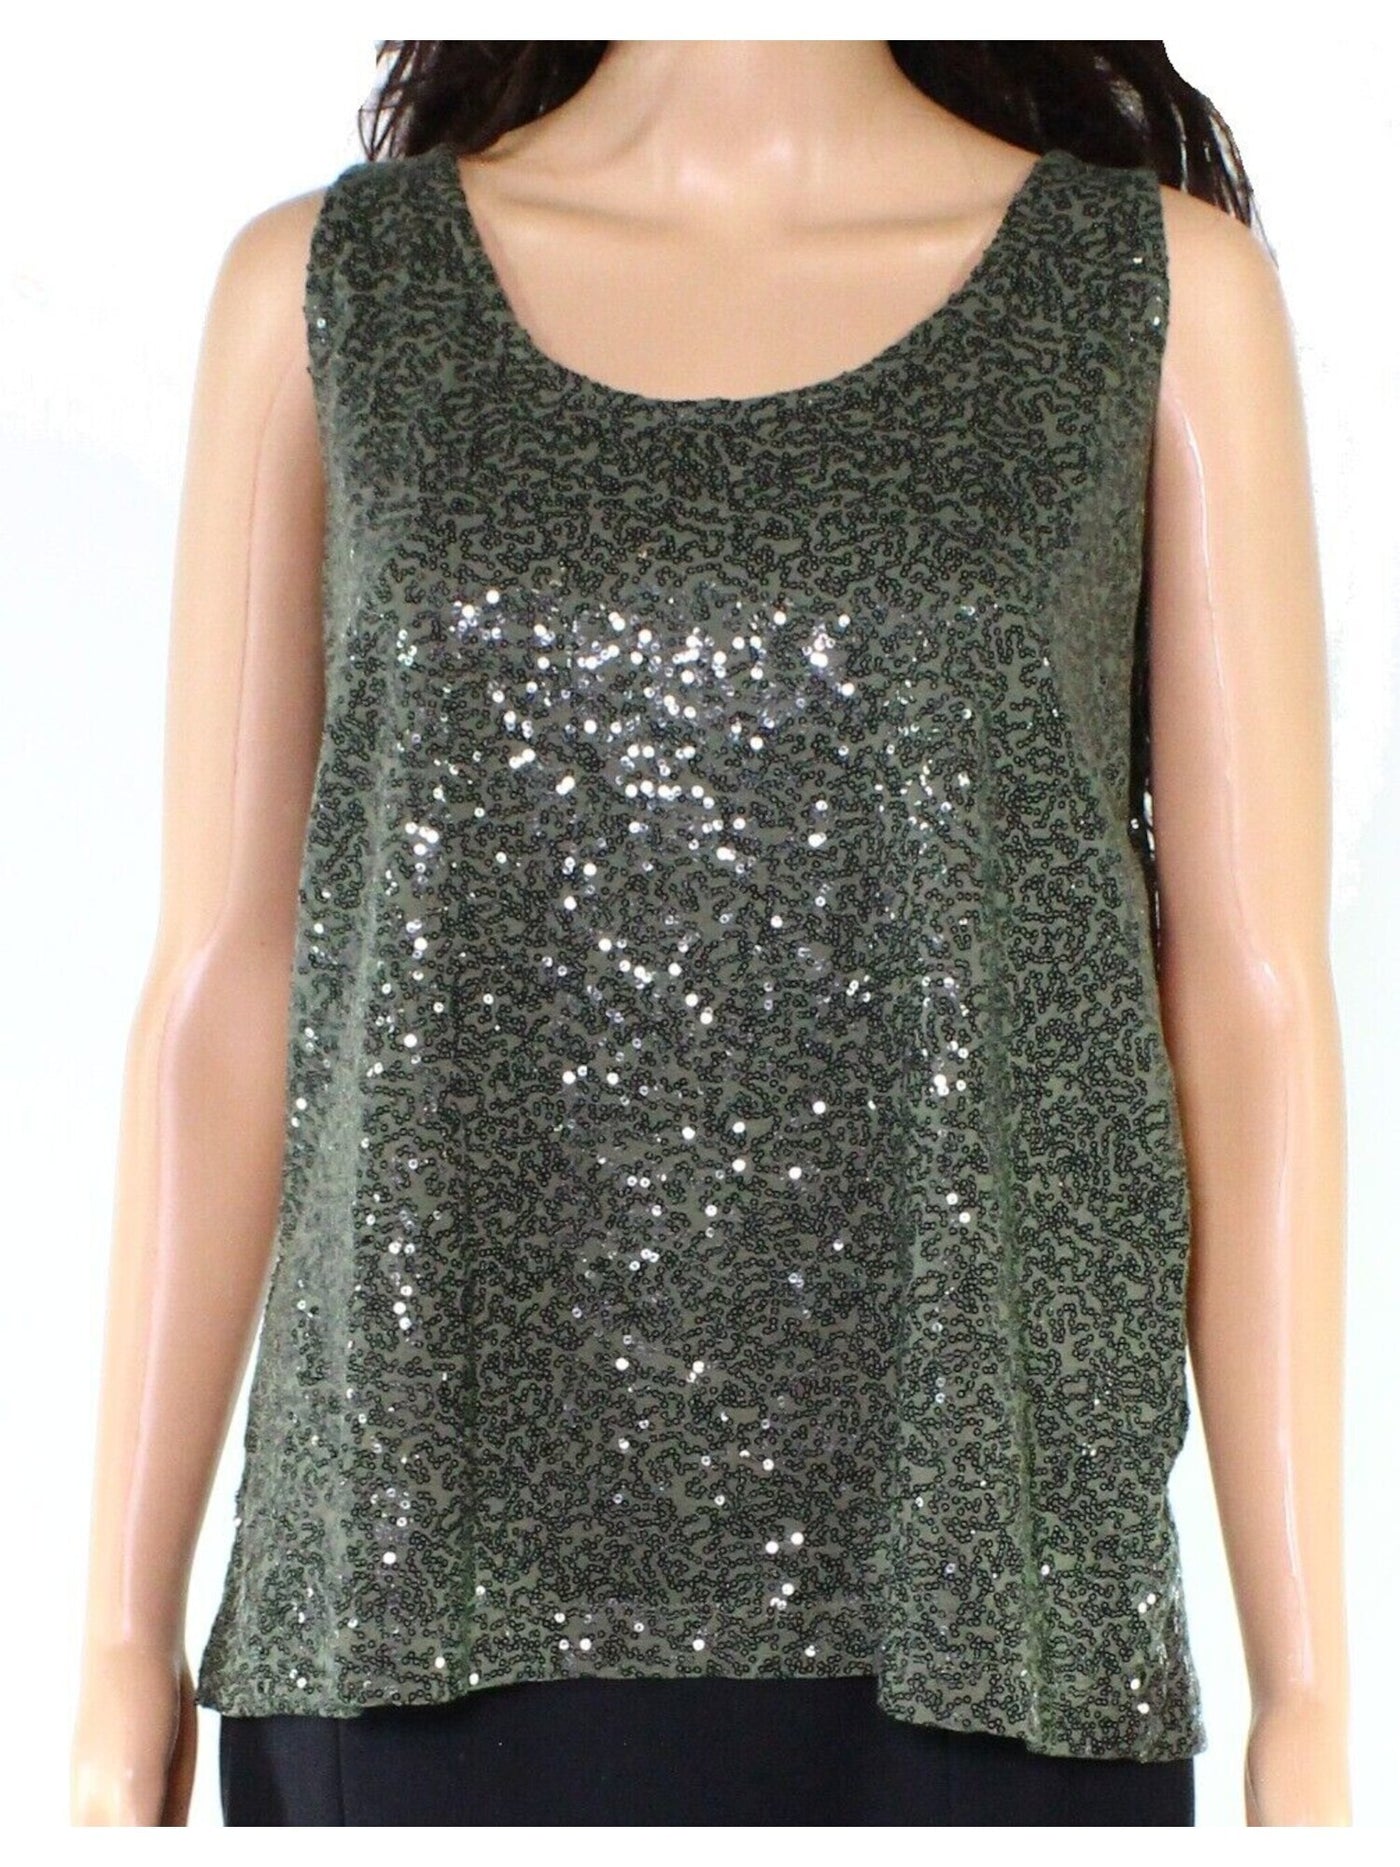 DKNY Womens Green Stretch Sequined Sleeveless Scoop Neck Evening Tank Top S